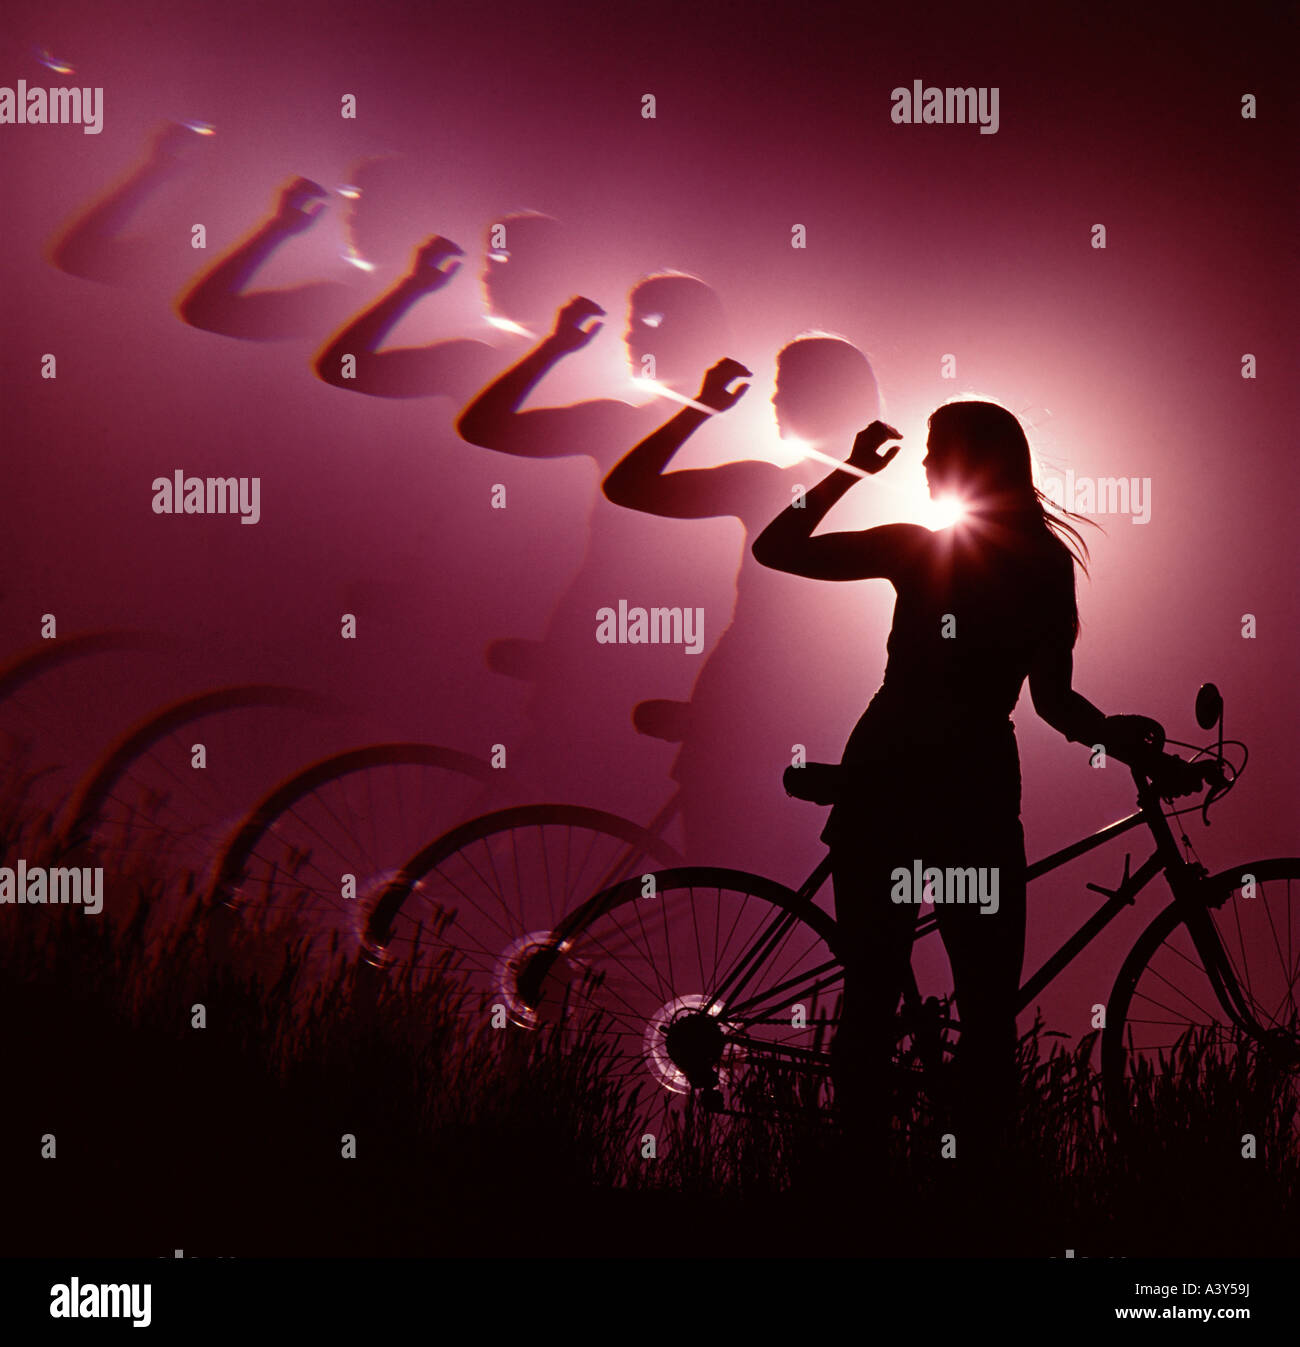 Repeat silhouette of young woman and bicycle Stock Photo